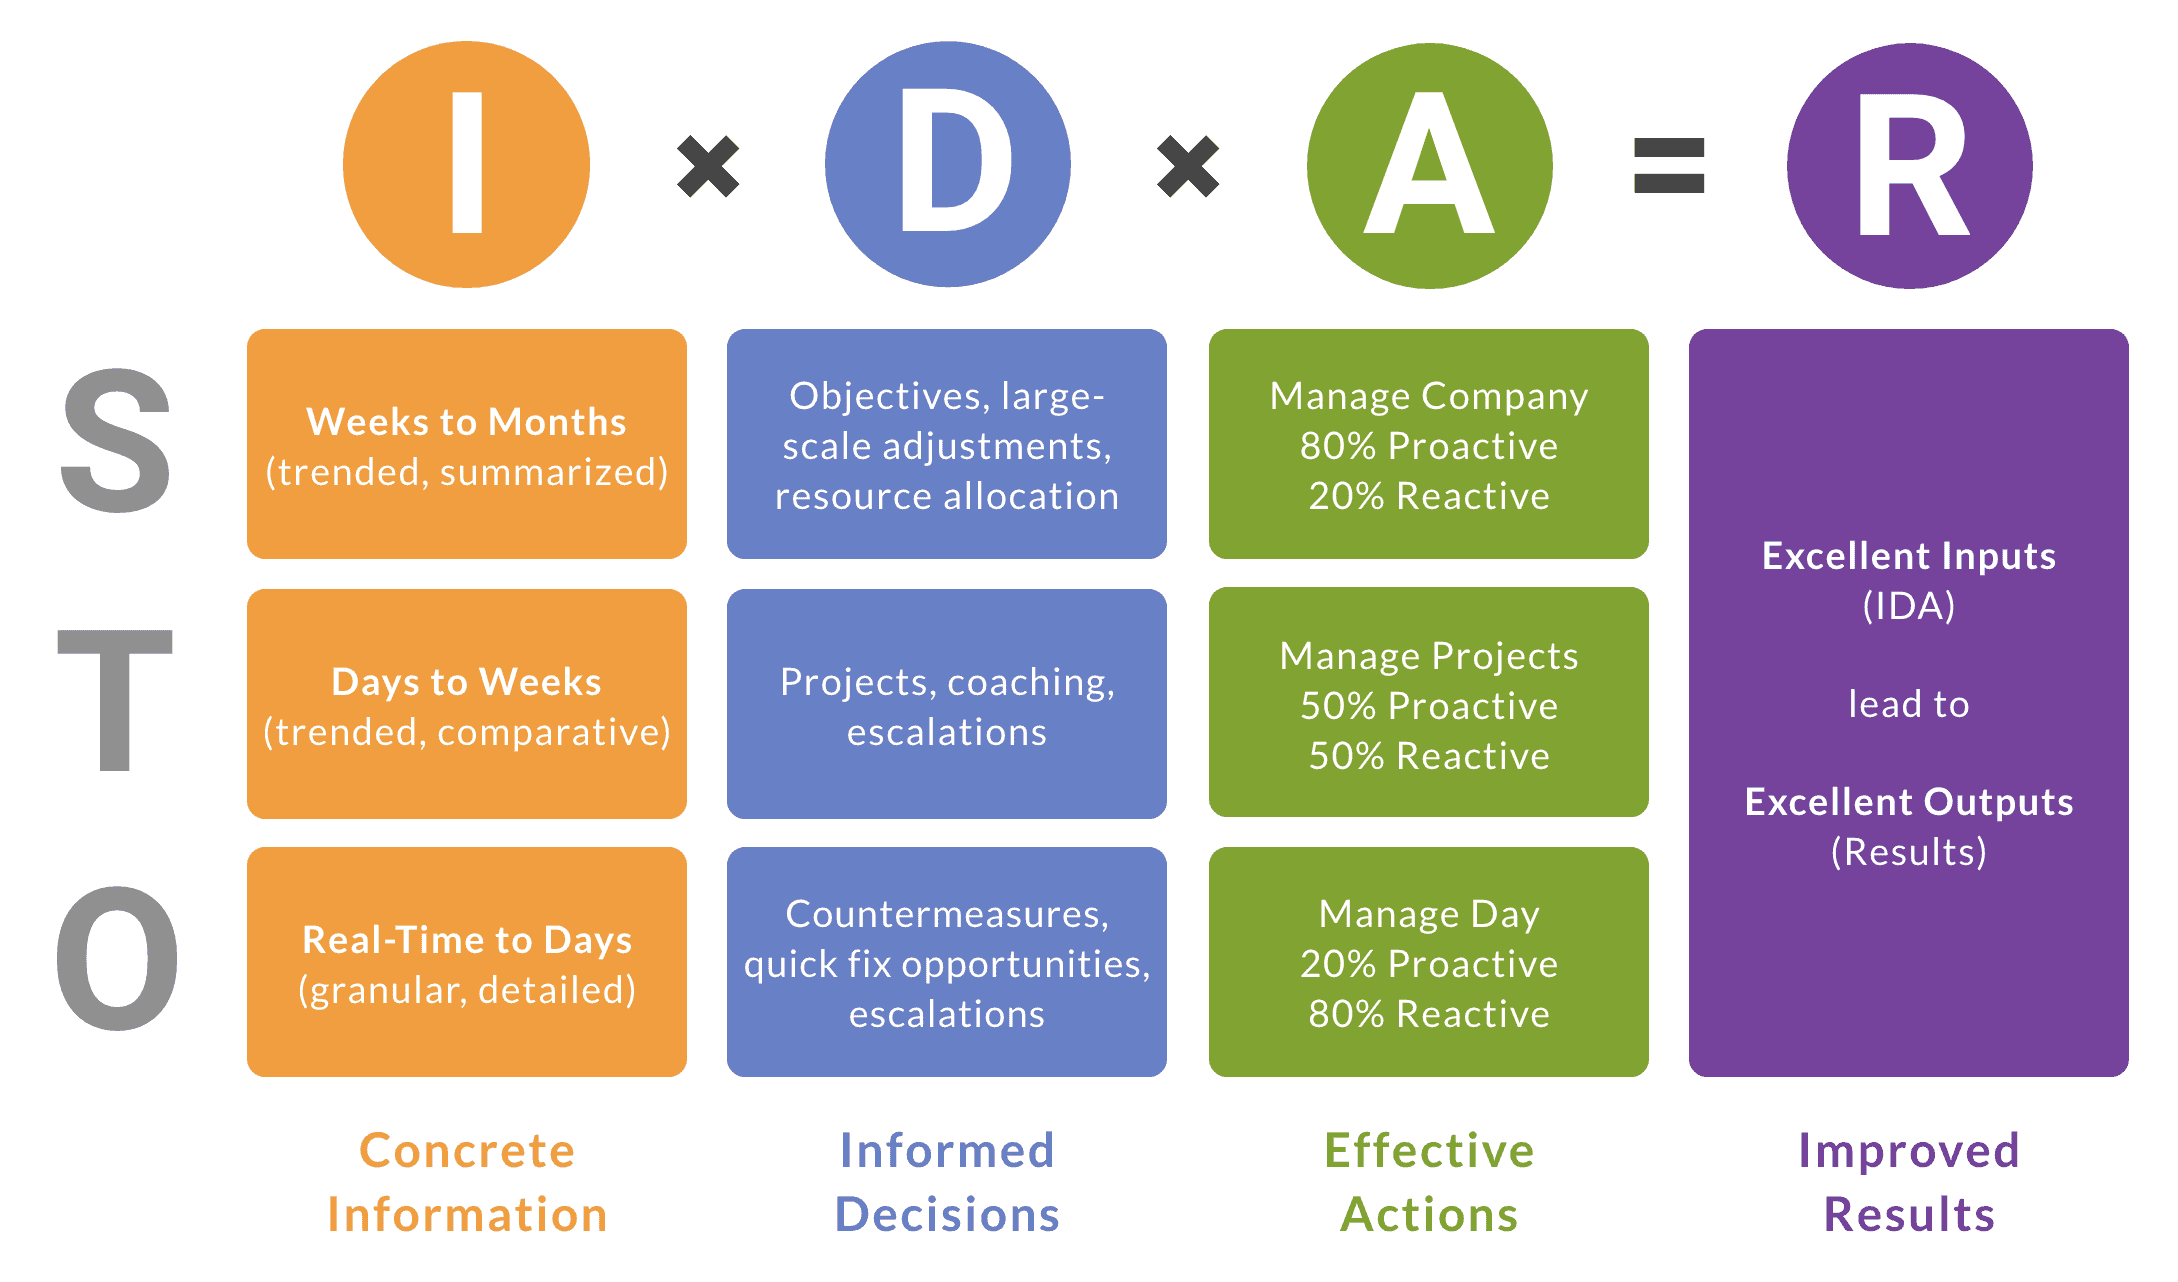 Diagram showing that concrete information, informed decisions, and effective action lead to improved results.